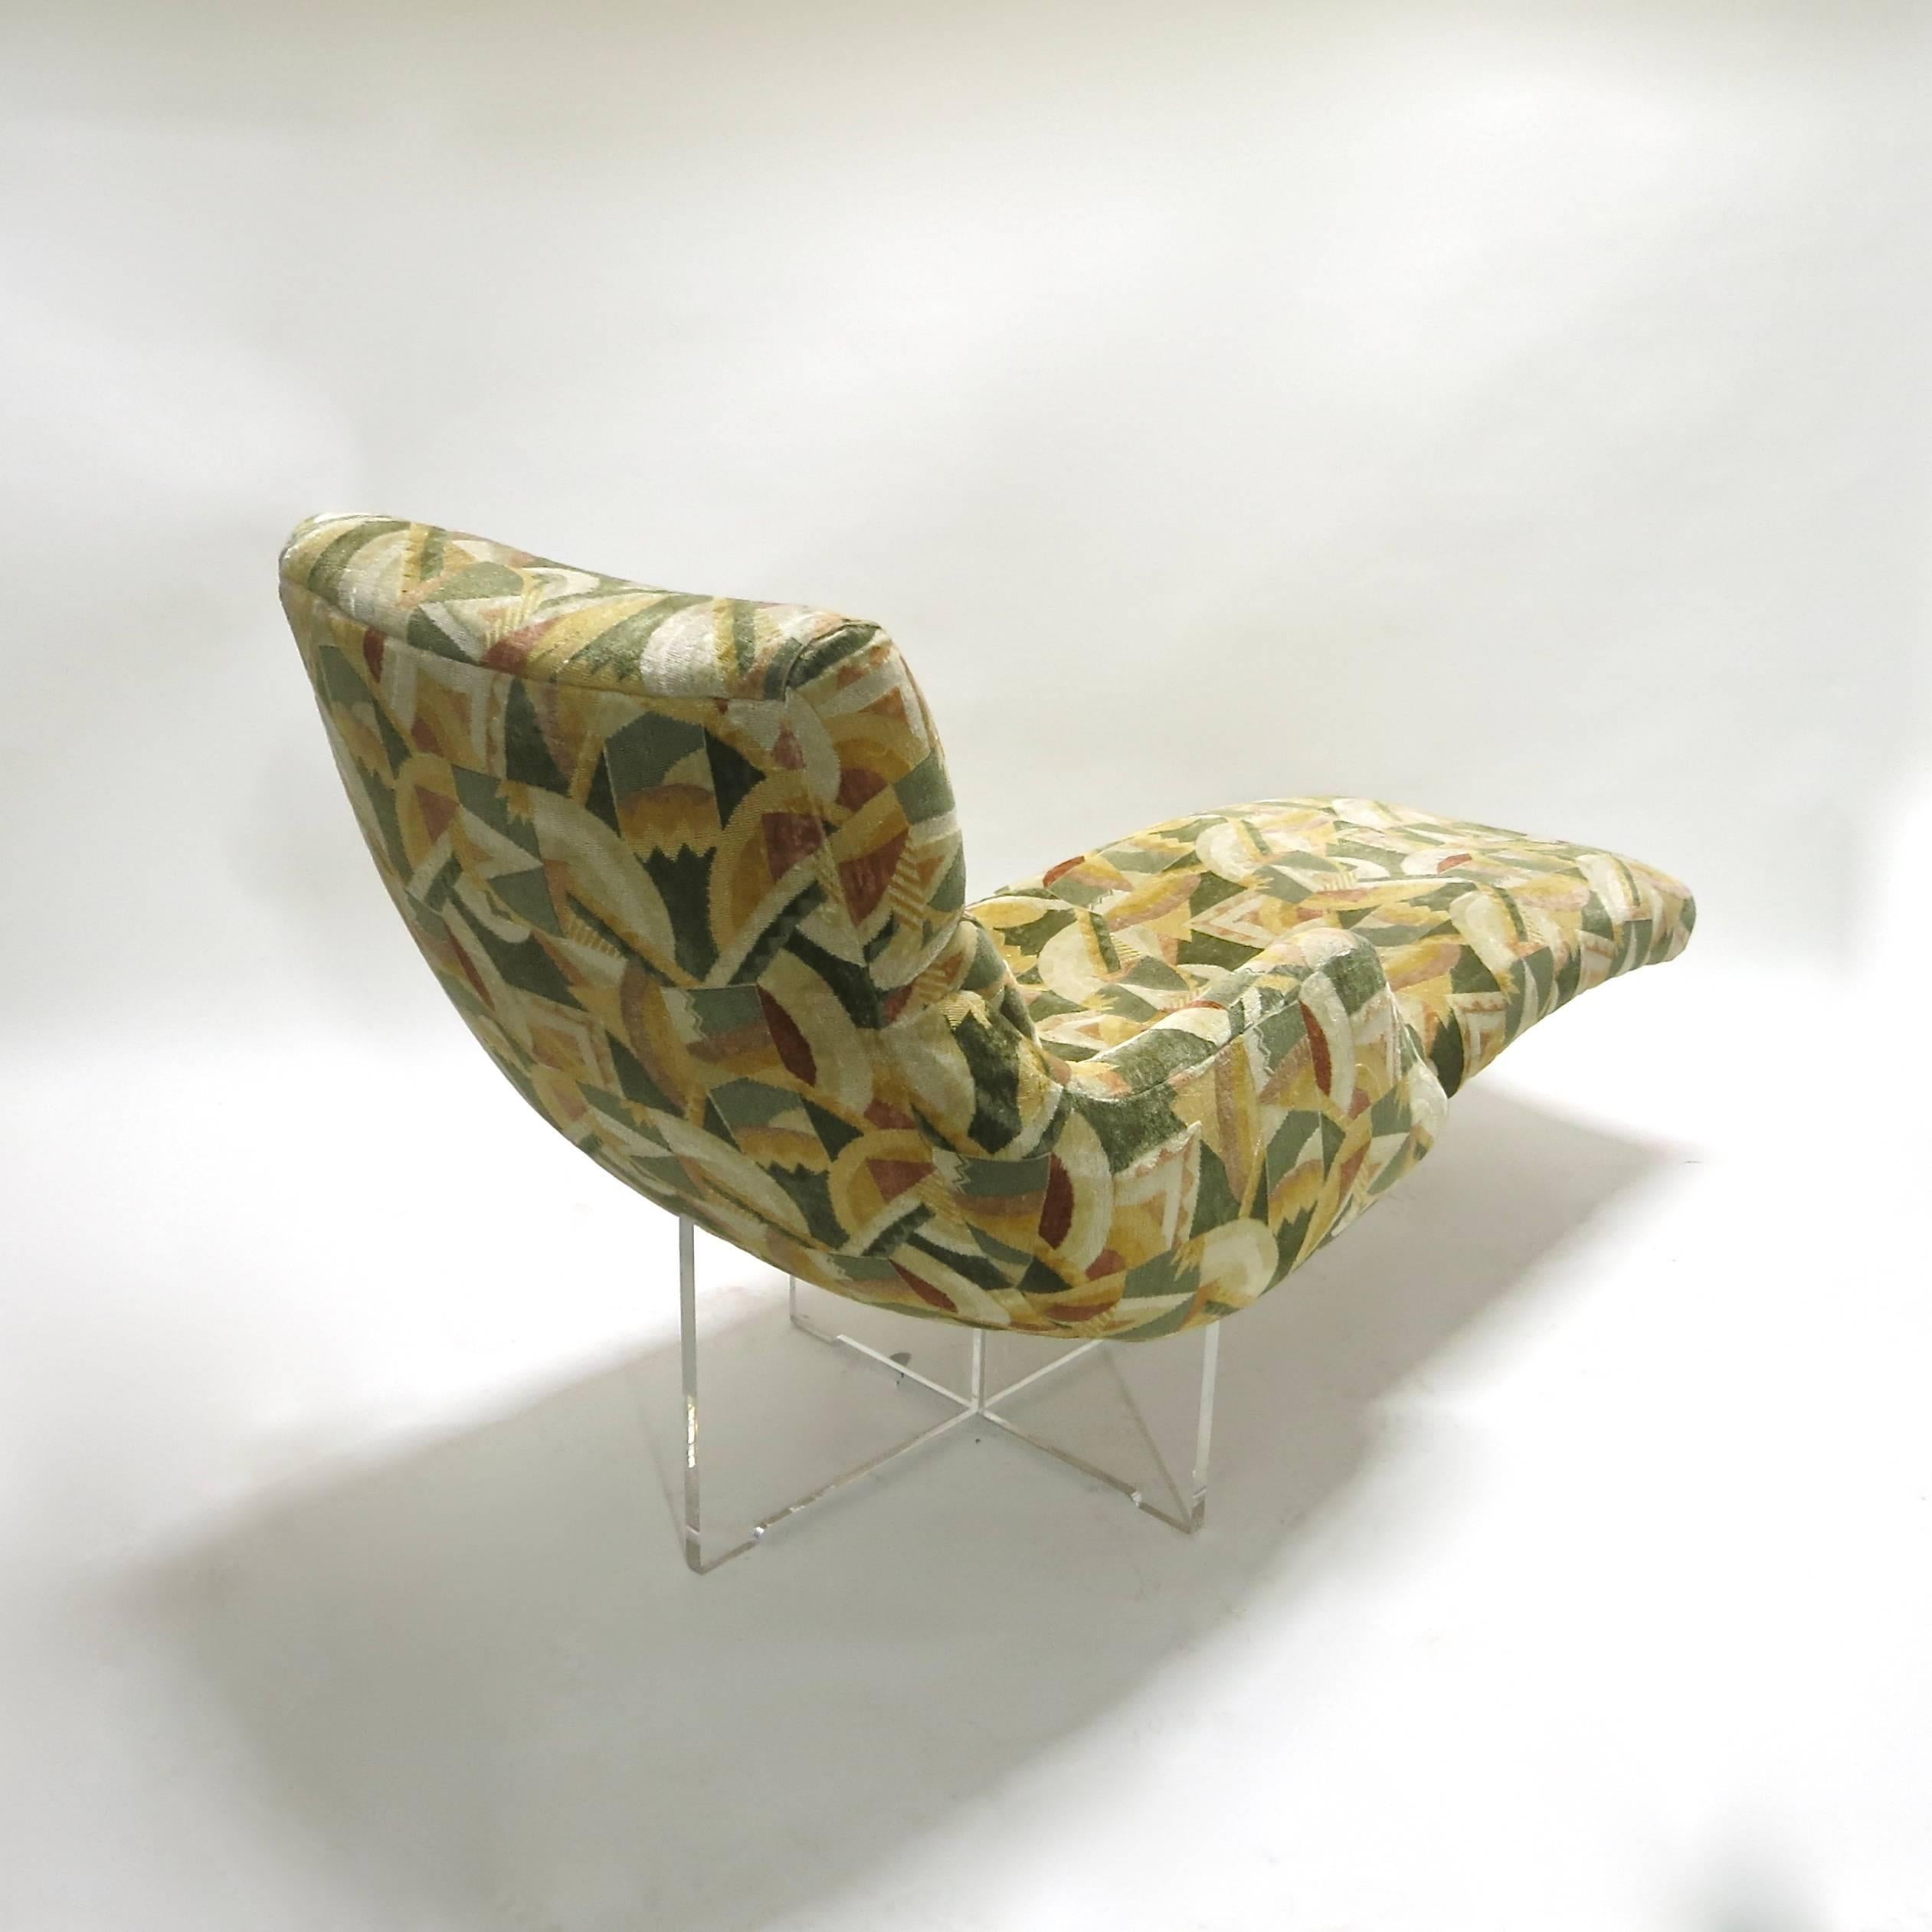 Mid-20th Century Erica Chaise Longue Designed by Vladimir Kagan in 1969, Made in USA